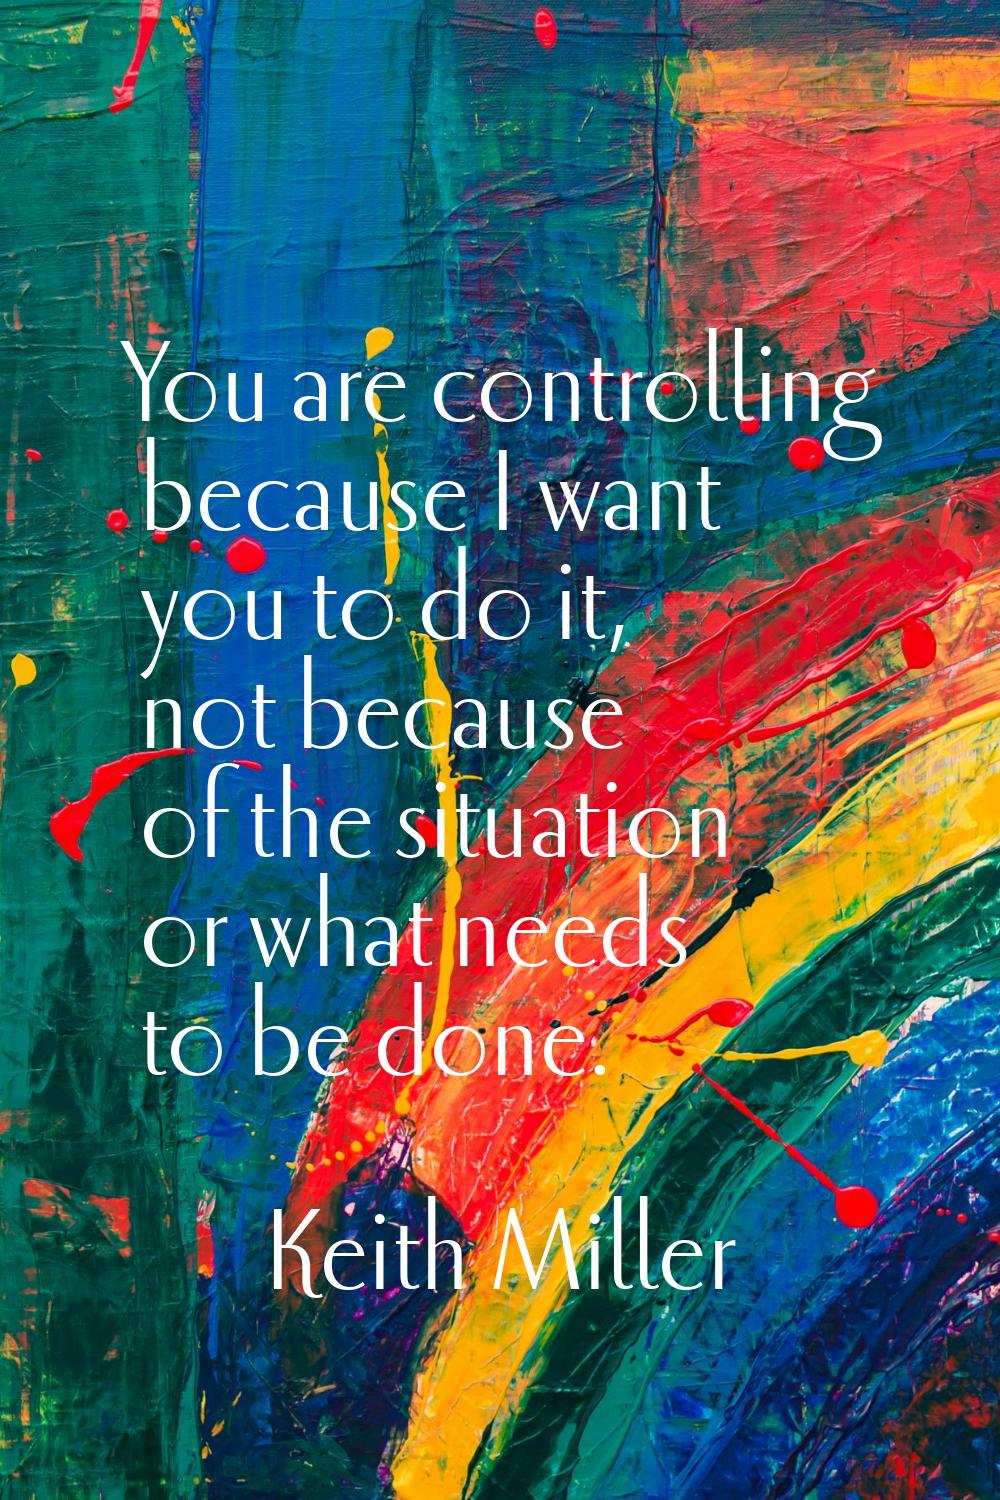 You are controlling because I want you to do it, not because of the situation or what needs to be d